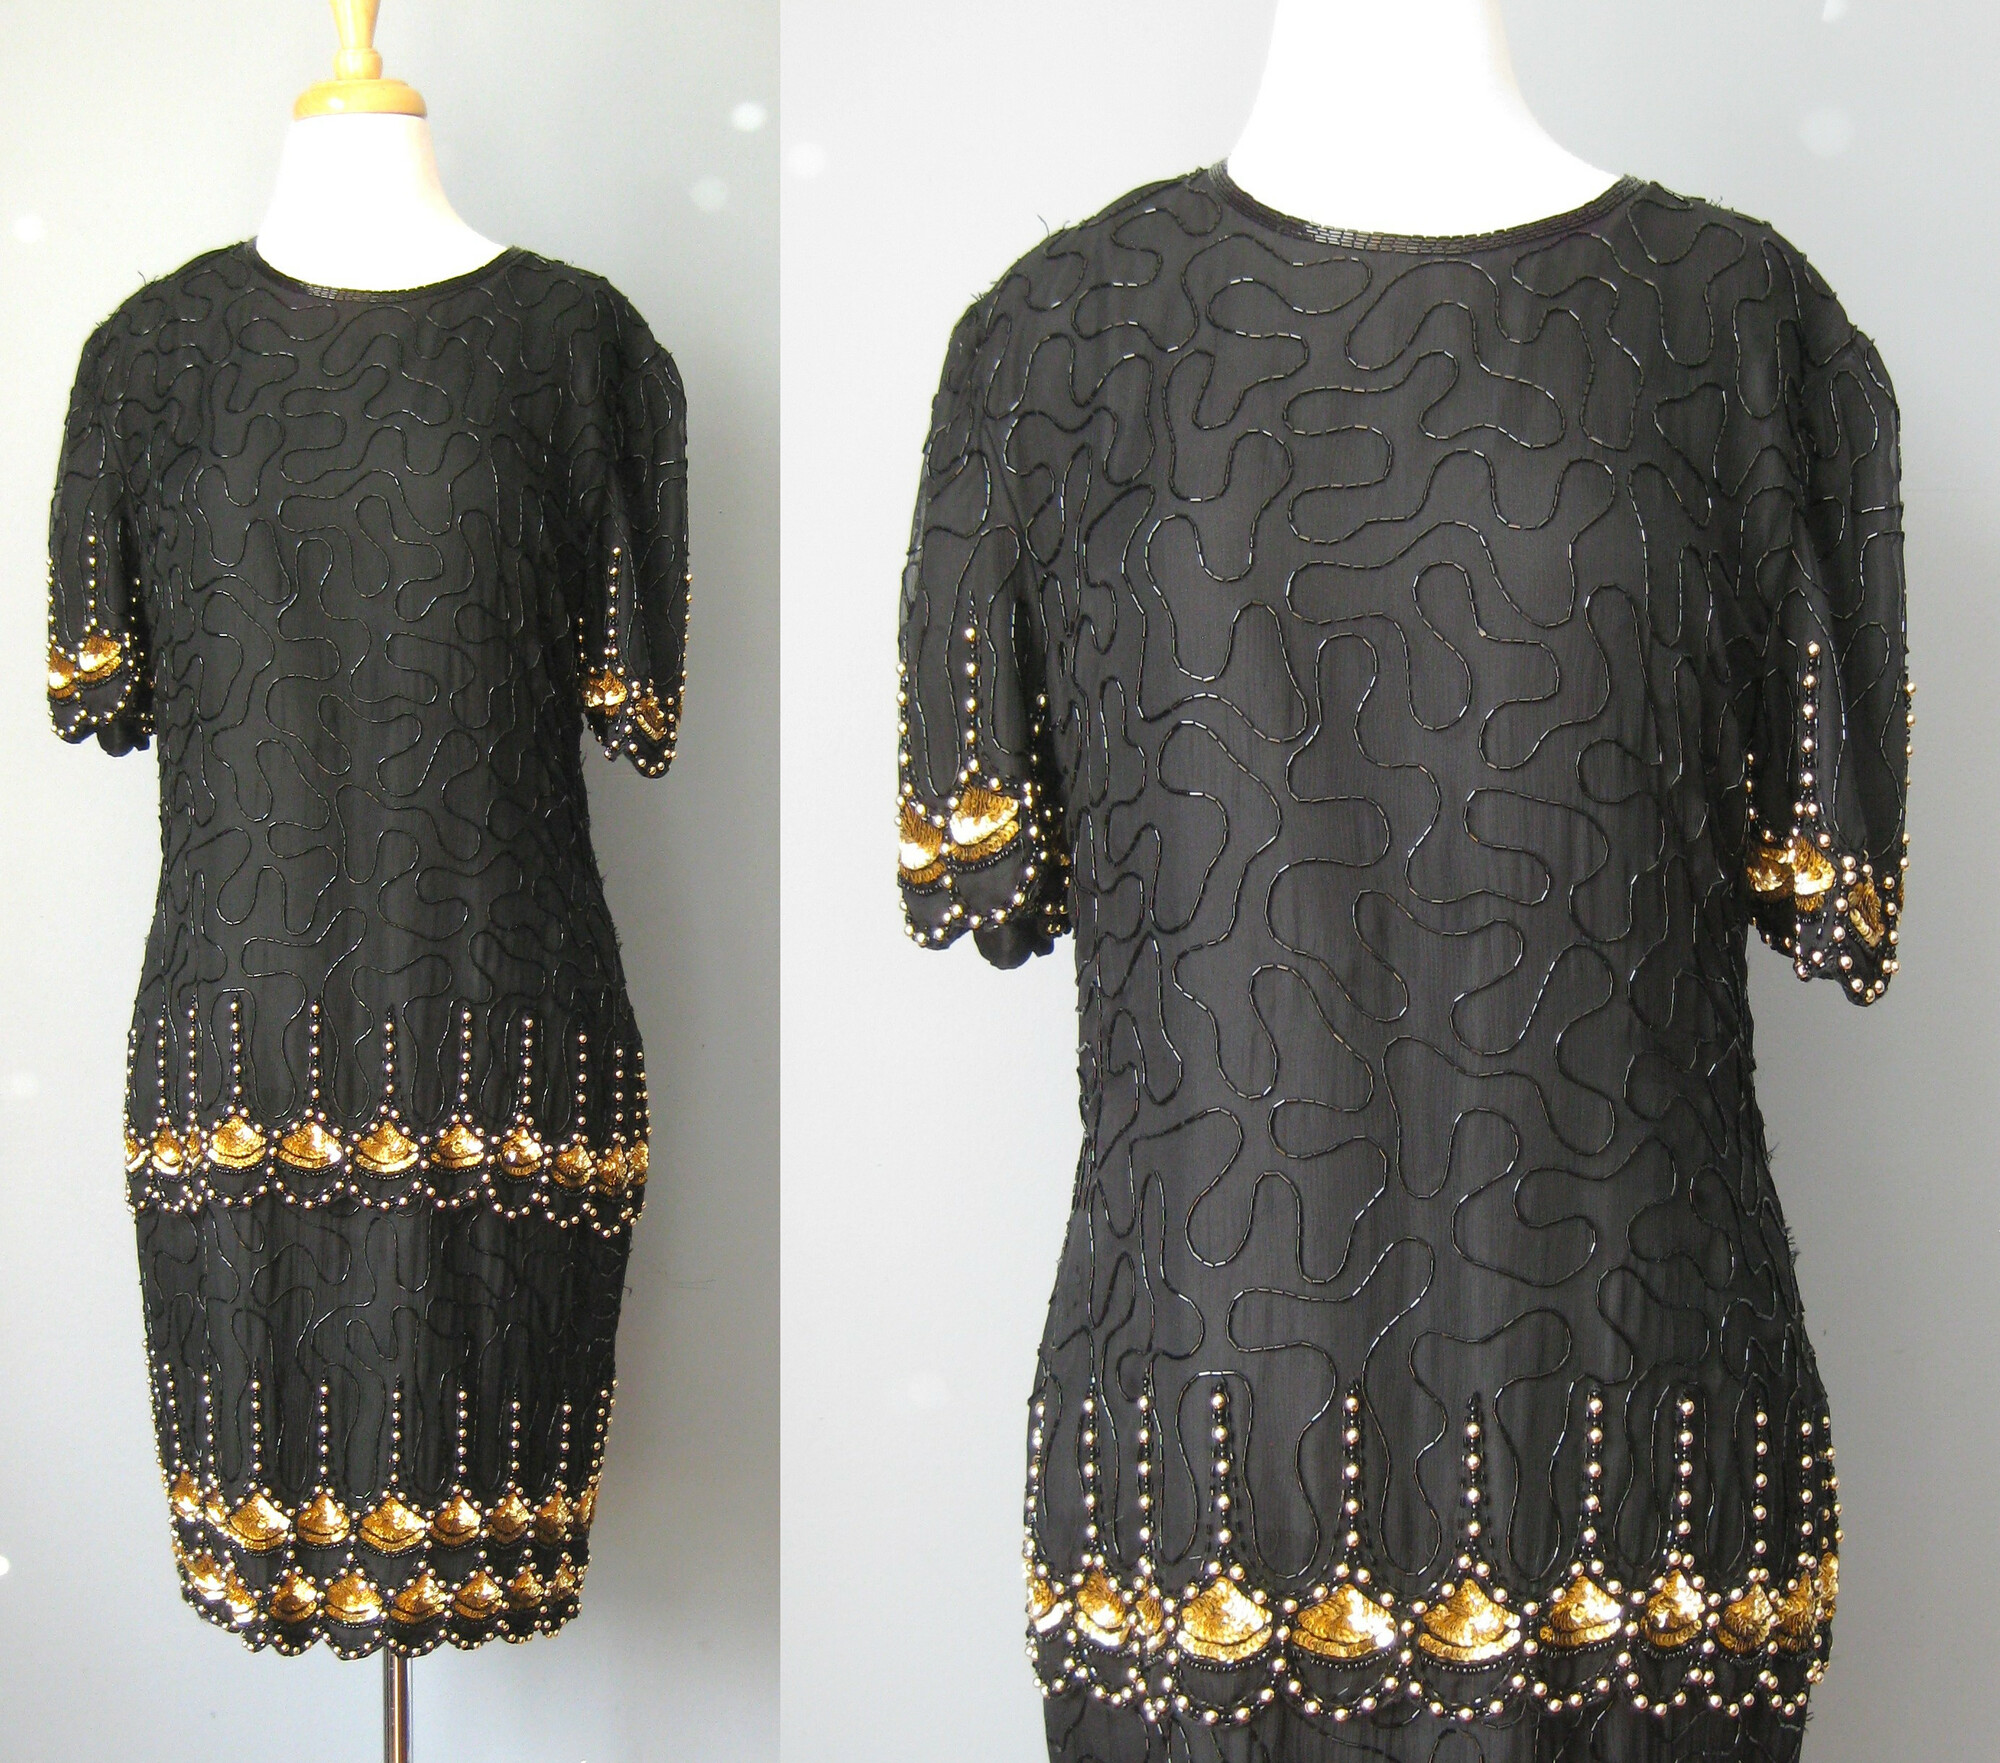 Vtg L. Kazar Beaded, Black, Size: XL
This spectacular sequined silk cocktail dress from the 1980s is perfect for festive evening occasions.    Especially if the event has a Roaring Twenties Theme.
The straight silhouette, emphasized by vertical design lines is both flattering and evocative of the era.
The dropped waist with inverted and stylized papyrus symbols evokes Ancient Egypt a favorite design inspiration in the 1920s.

The silk shell is fully lined. There is no stretch to this garment, it has a zipper in the center of the back.
The dress is by Lawrence Kazar.

Here are the flat measurements, please double where appropriate:
Shoulder to Shoulder: 16
Armpit to Armpit: 21
Waist: 17
Hips: 20
Length from back of neck to hem: 38

The dress itself is in excellent condition.  As is almost always the case with these dresses with overall beading, there are a few beads missing in the seat area.


Thank you for looking!
#42887